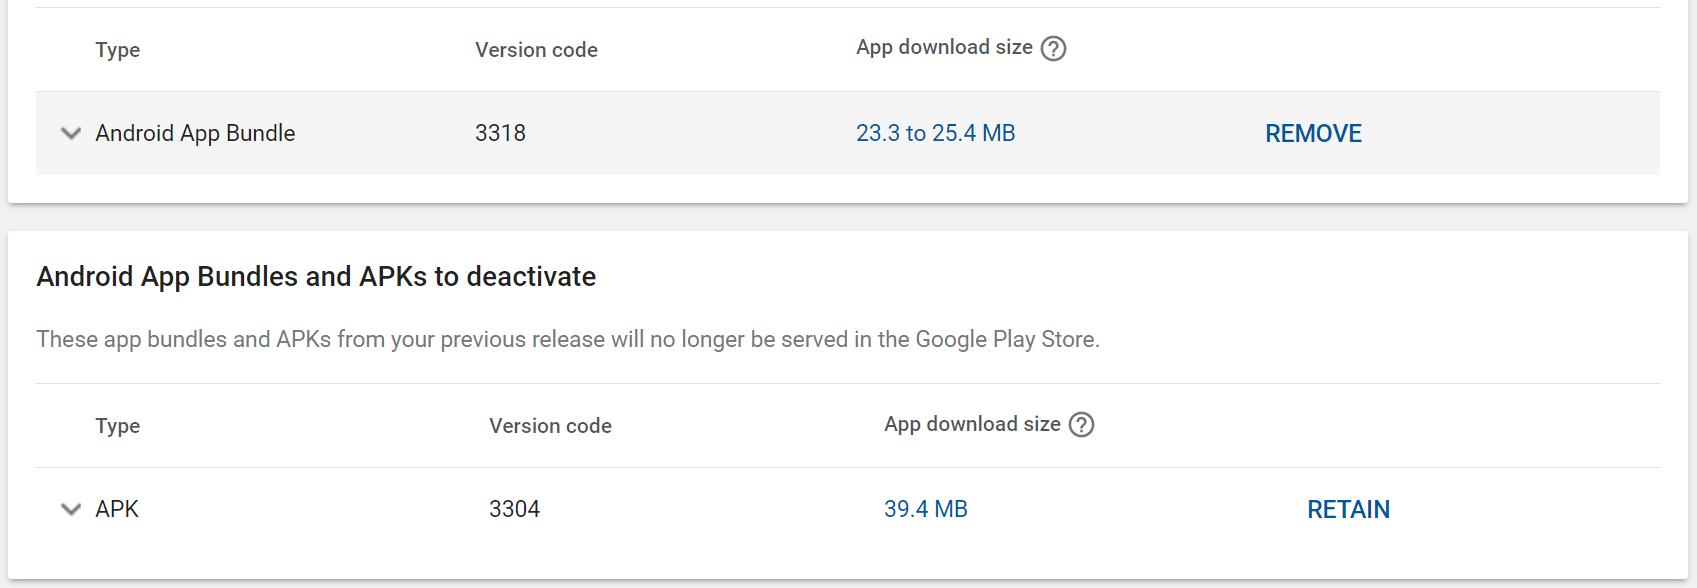 Creating an Android App Bundle cuts your app download size